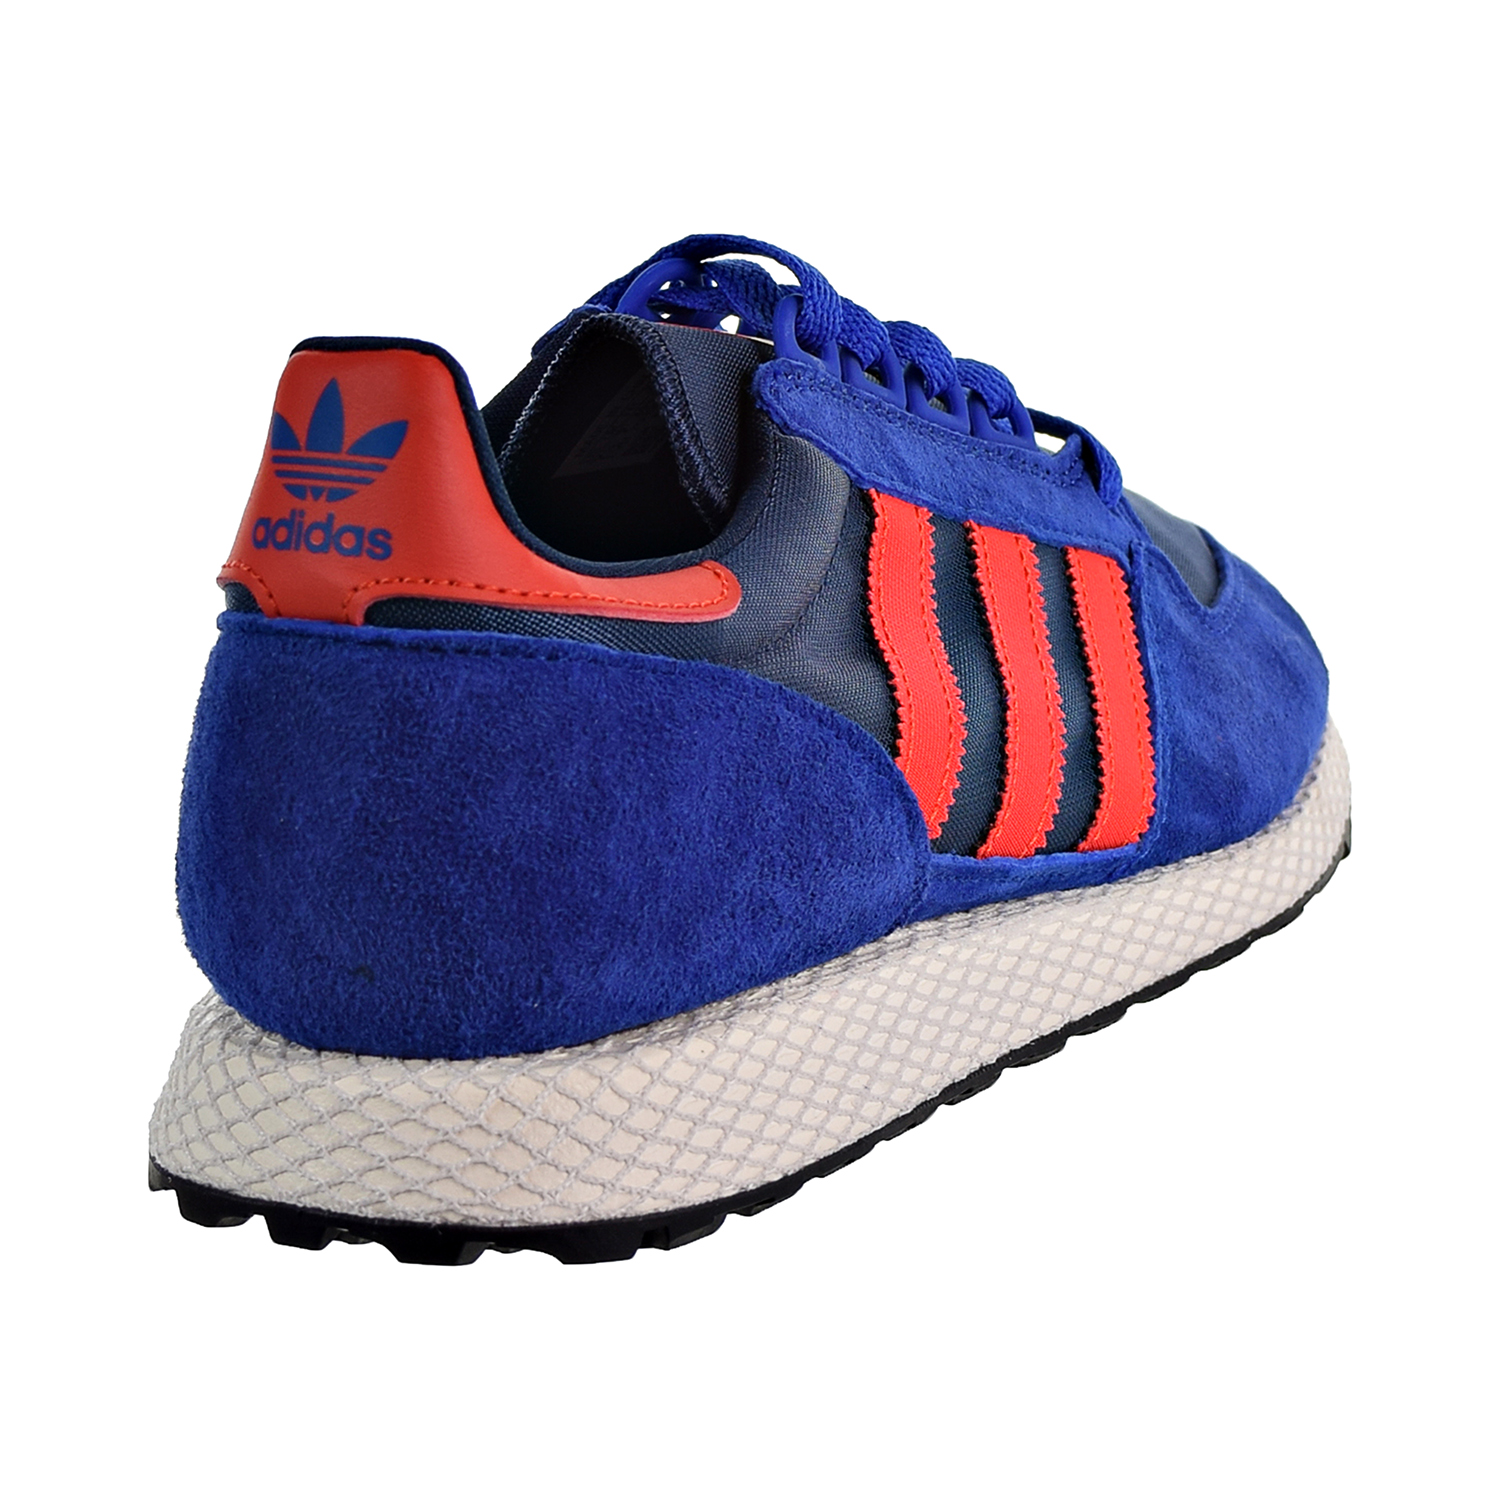 adidas forest grove men's